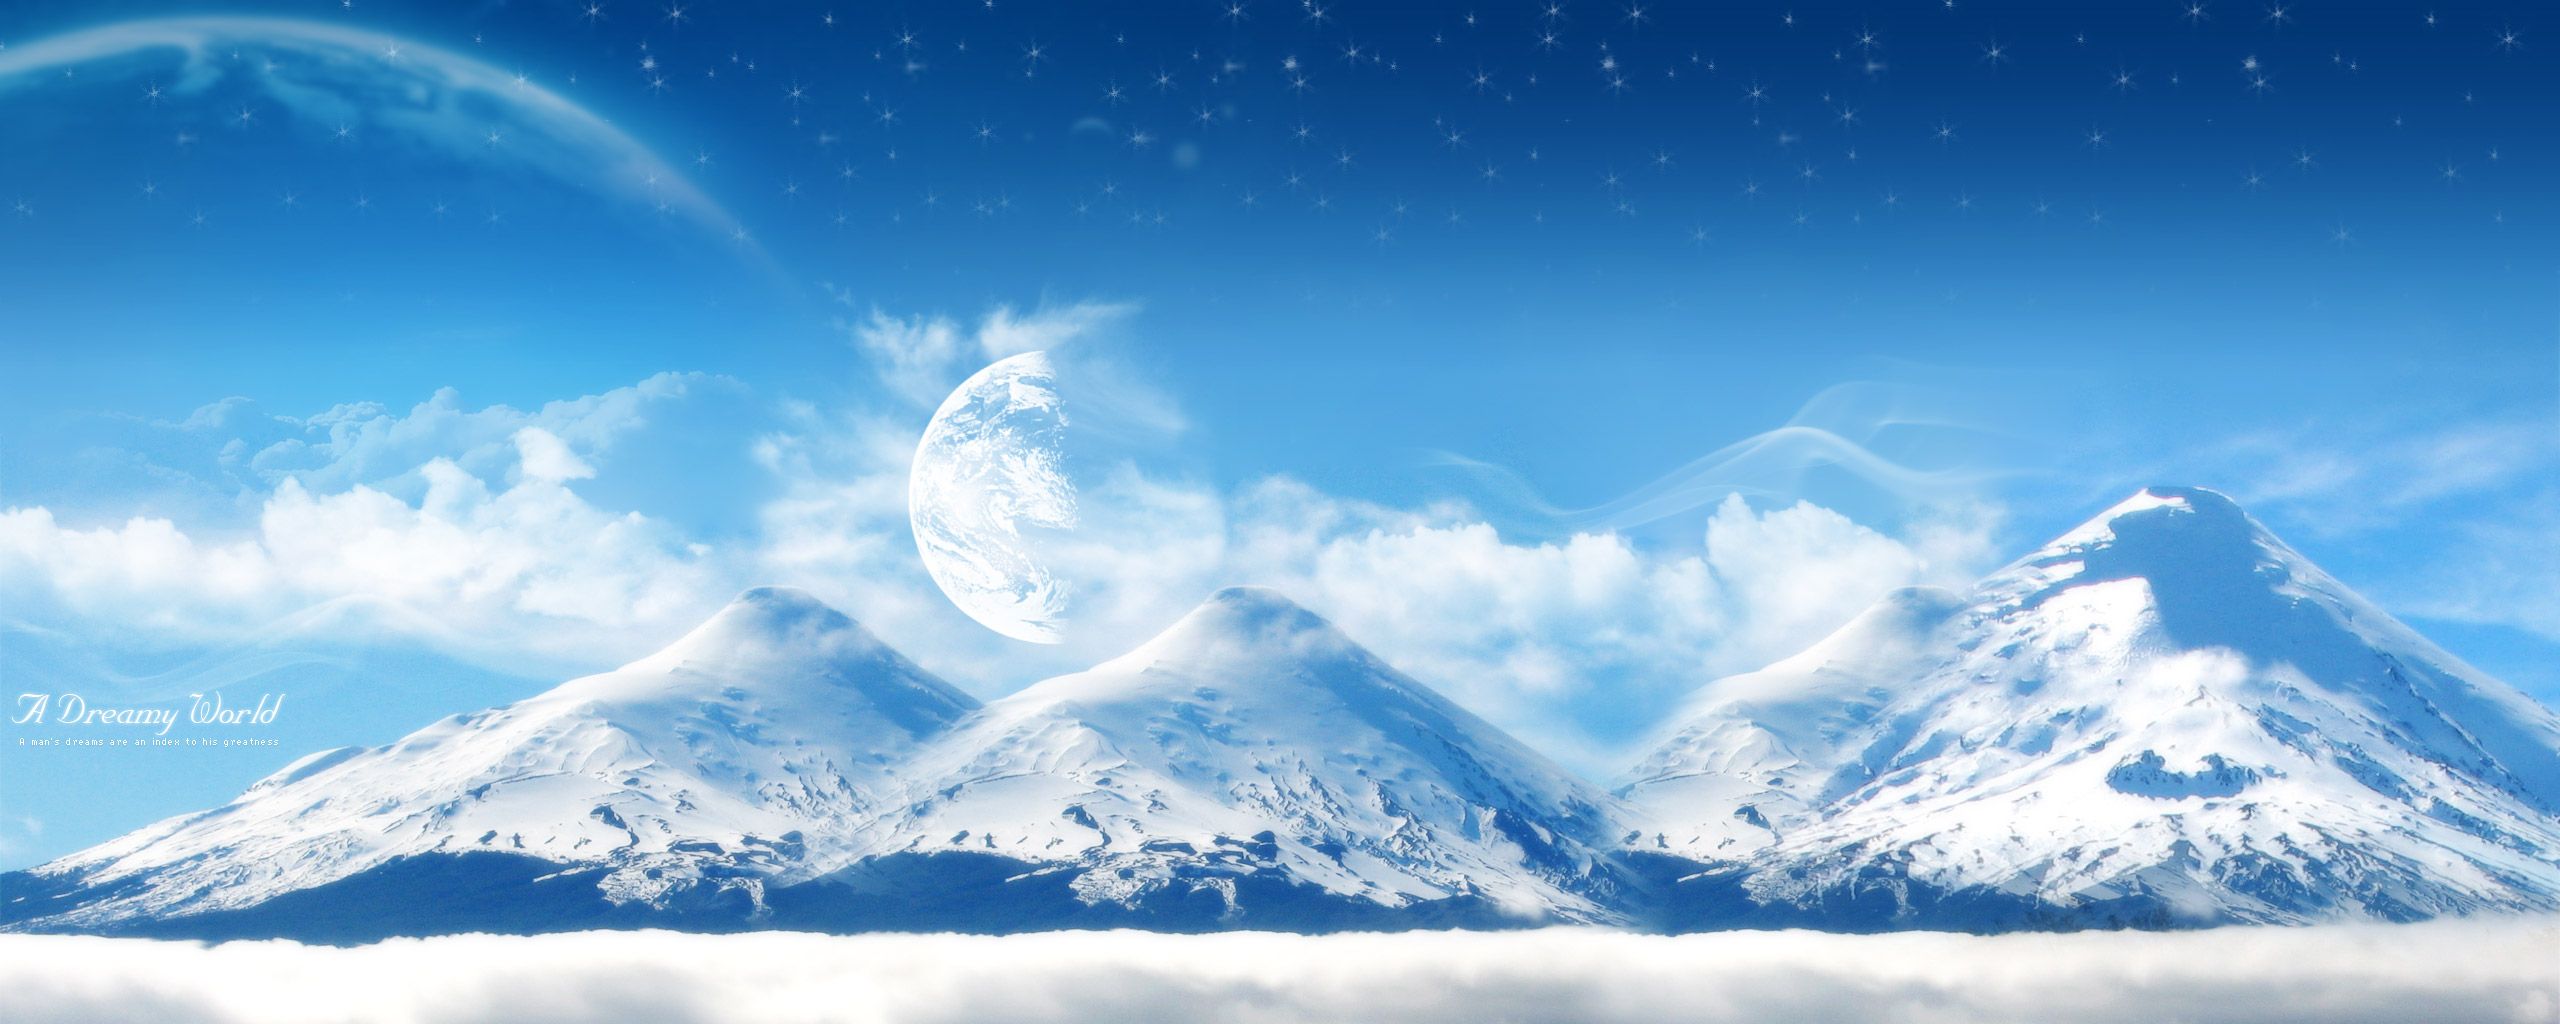 Dreamy World Snowy Mountain Wallpaper Images Photos